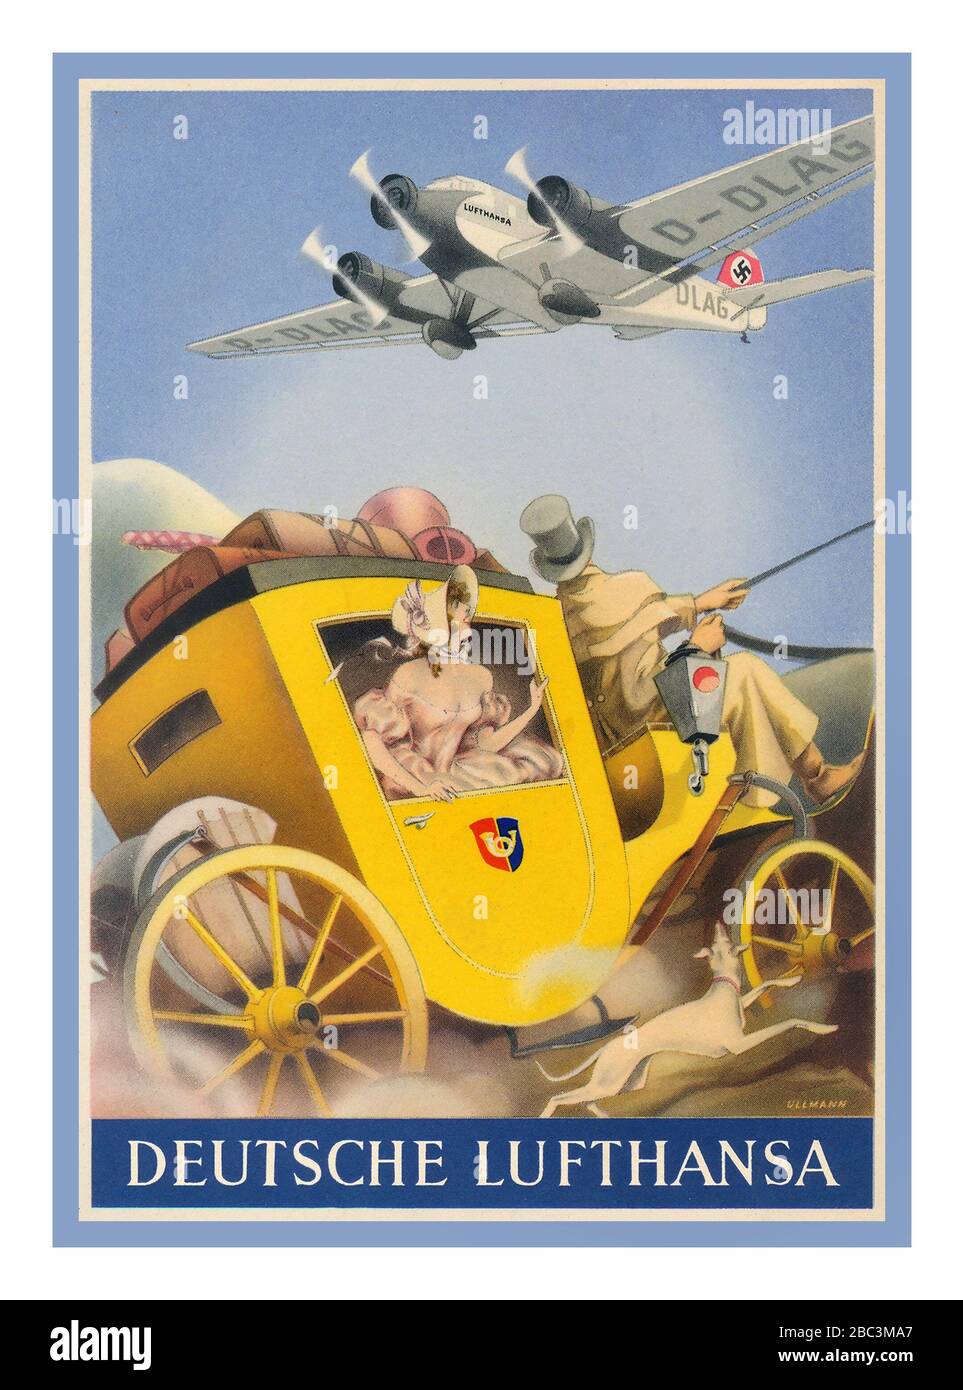 Vintage 1930s Nazi Germany DEUTSCHE LUFTHANSA press advertisement poster by Max Ullmann with twin engined Junkers JU 52 aircraft and swastika tail fin shown as modern Nazi Germany the way to travel and transport mail post contrasted with old mail coach and horses stagecoach Stock Photo